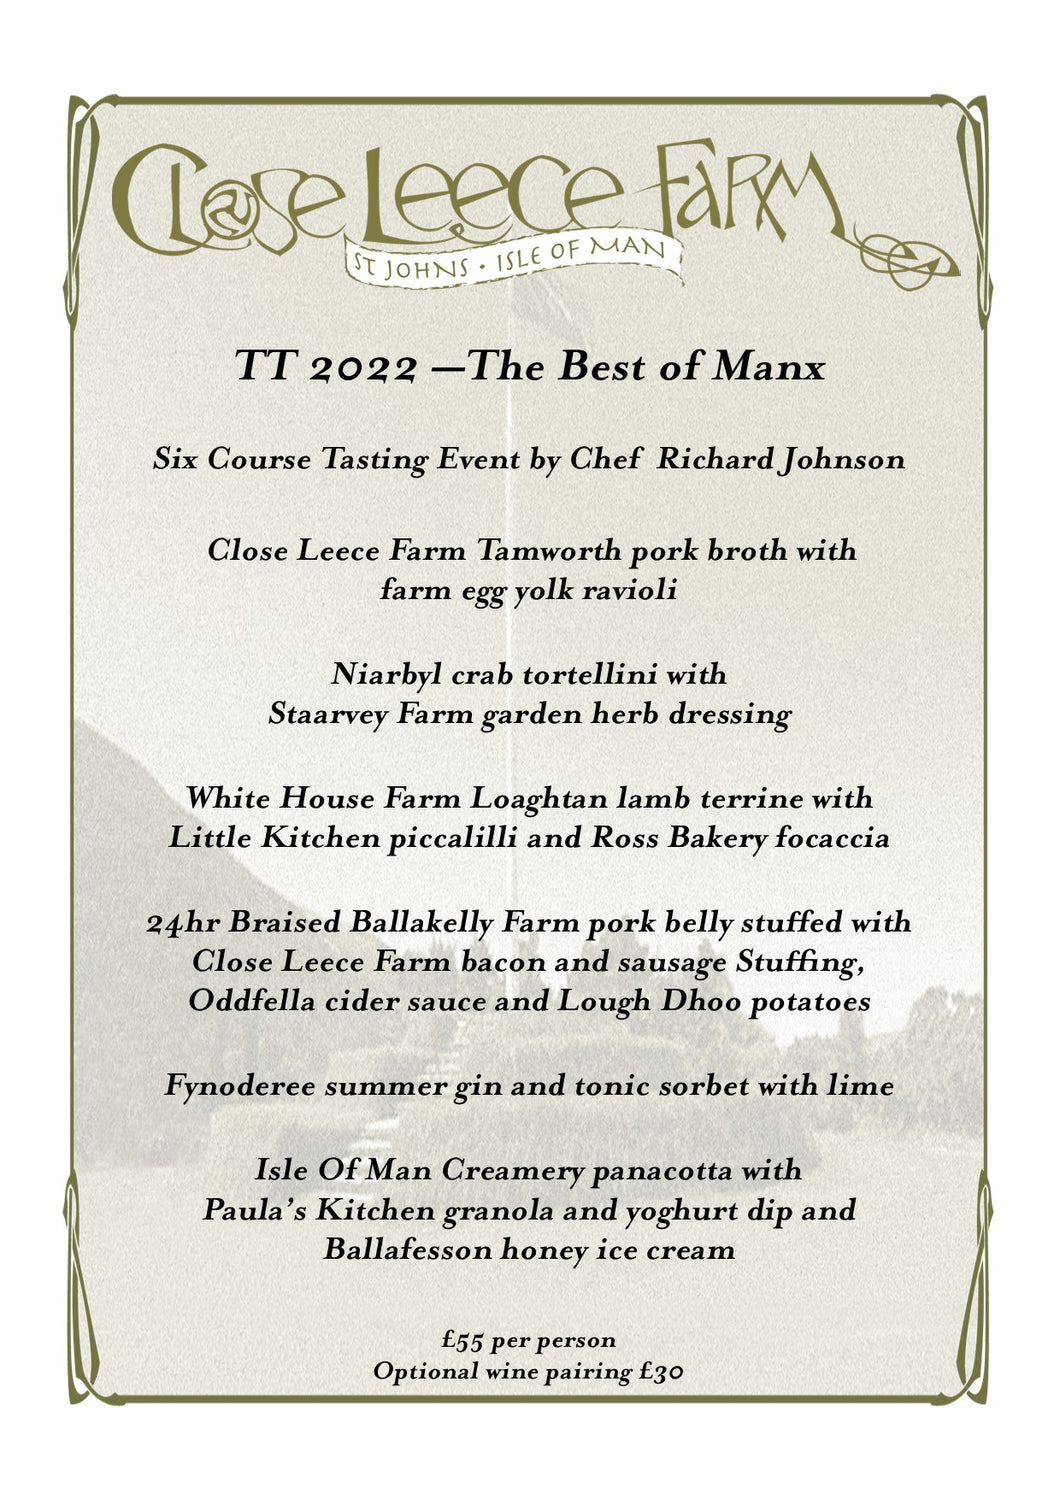 Book seats at our 6 course, 